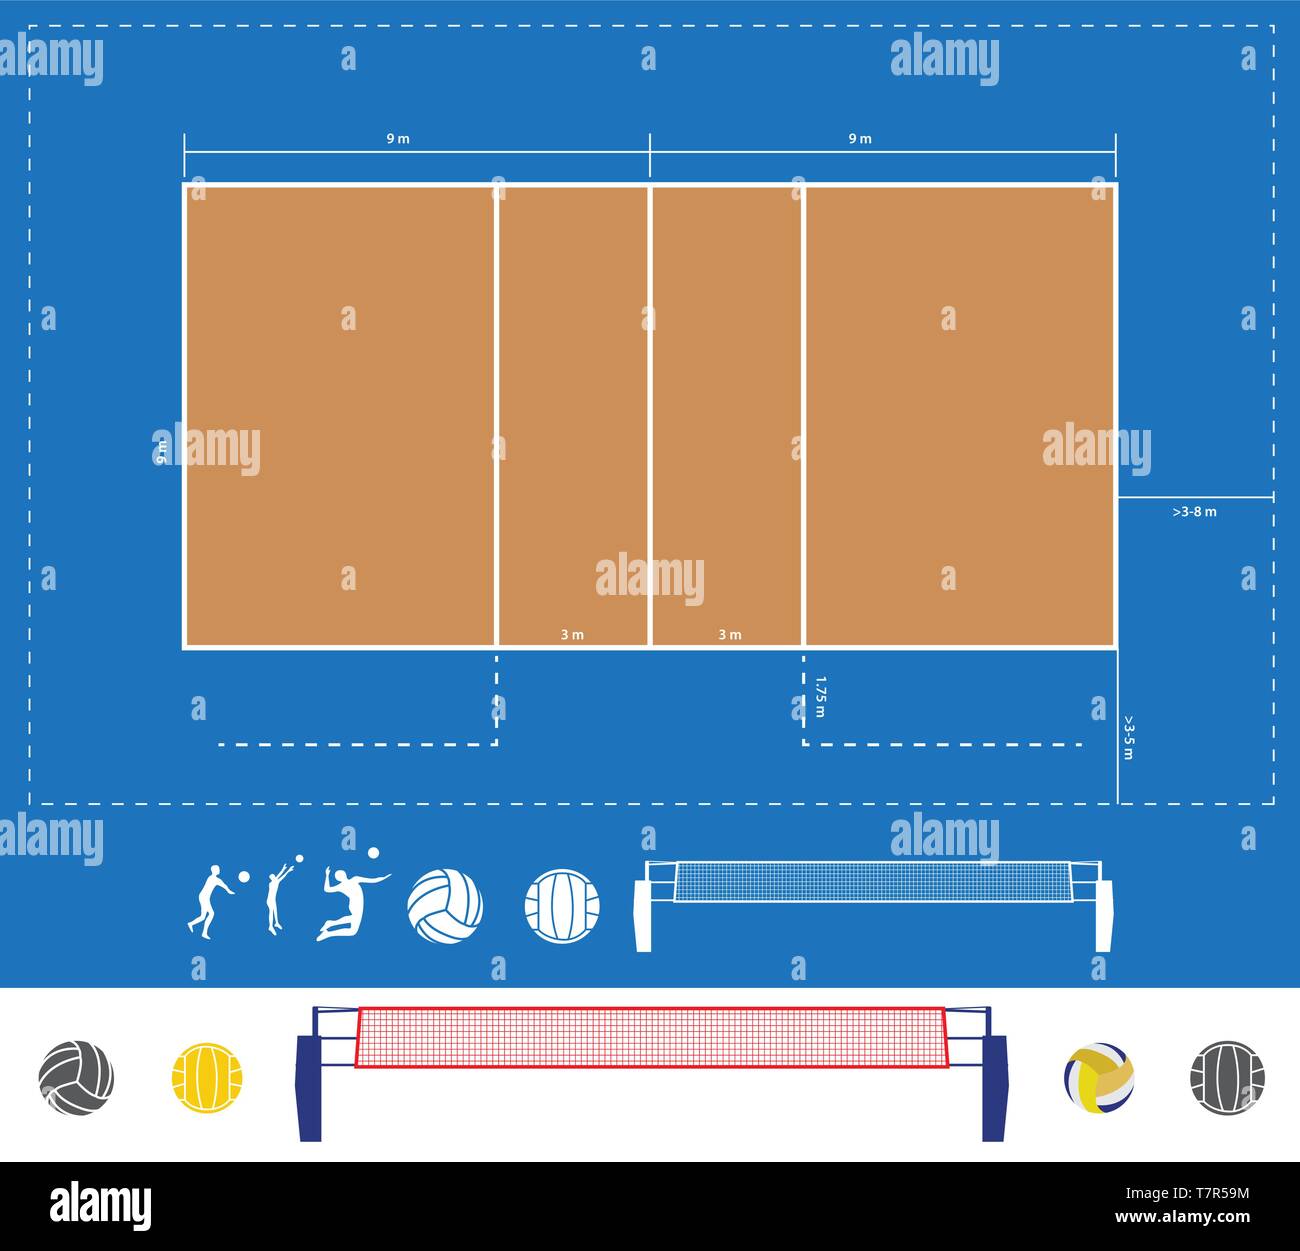 Volleyball net Cut Out Stock Images & Pictures - Alamy